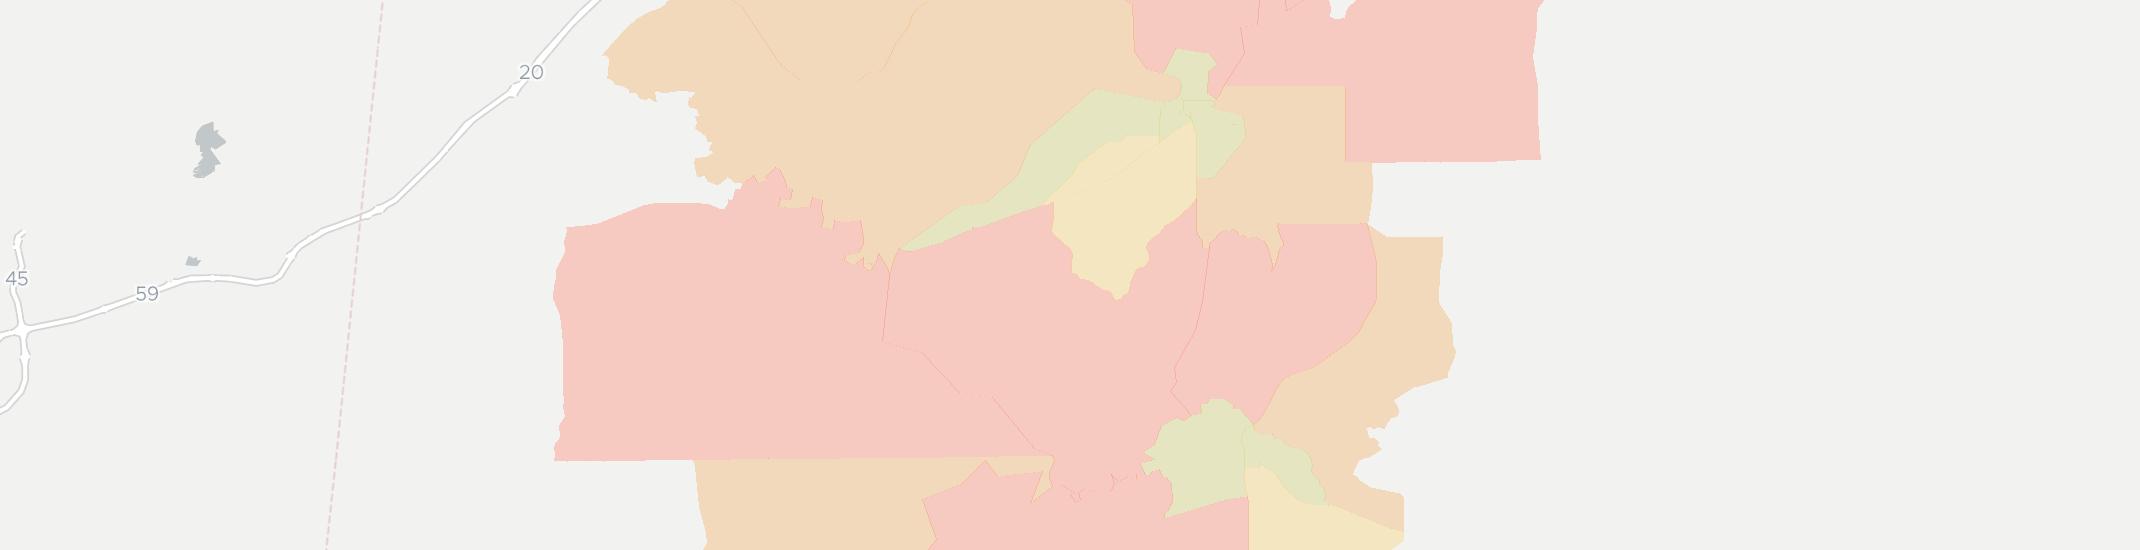 Demopolis Internet Competition Map. Click for interactive map